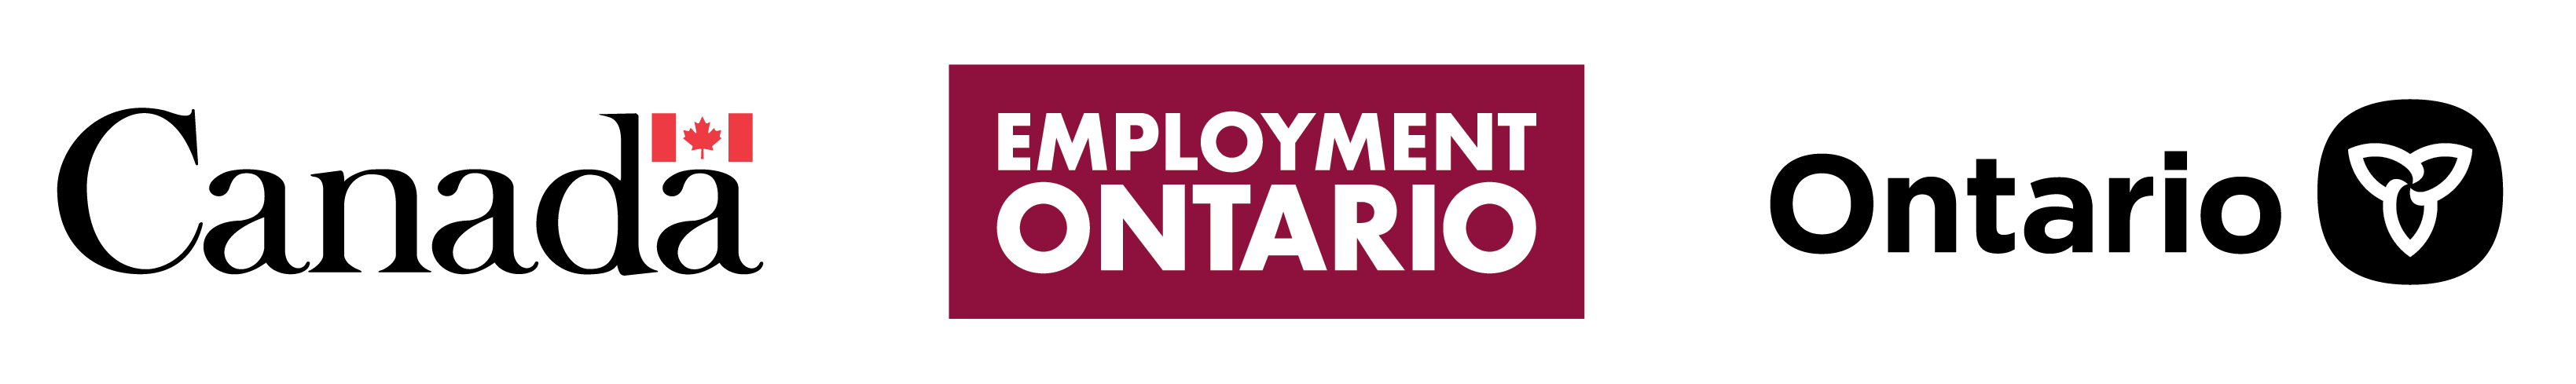 Logos including the Government of Canada, Employment Ontario, and the Province of Ontario